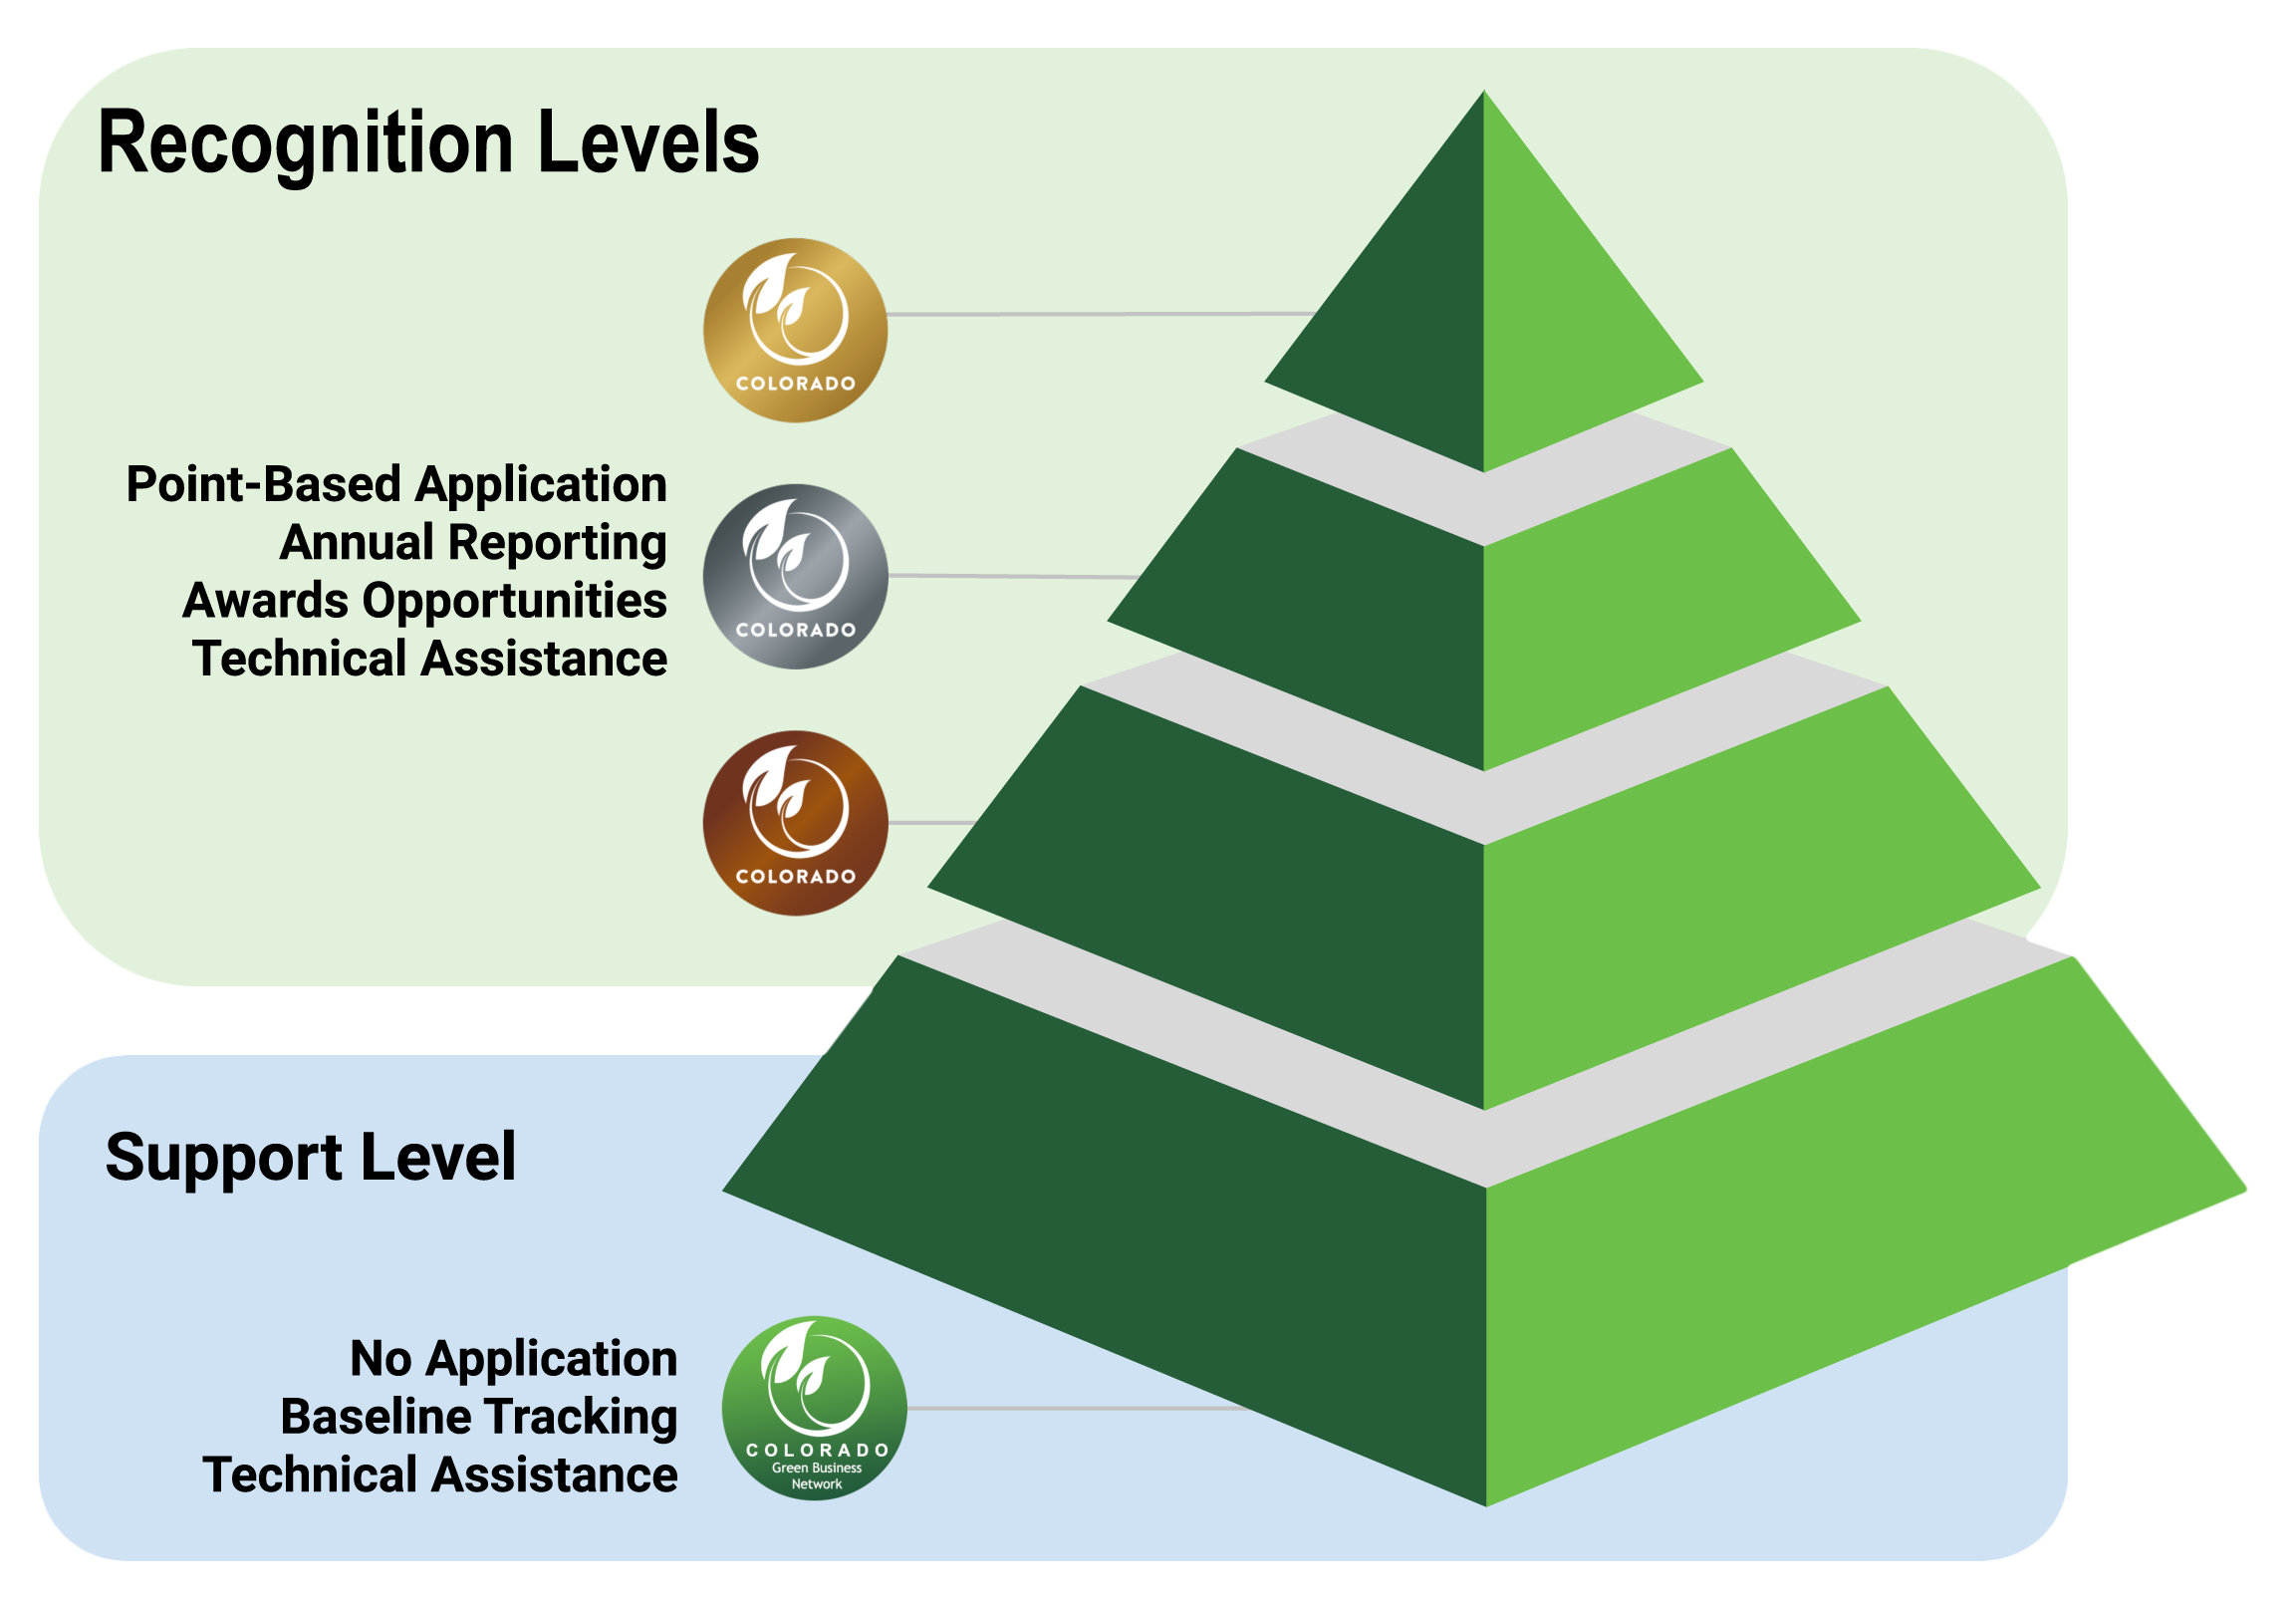 pyramid showing the different levels of CGBN; point-based application, annual reporting, awards opportunities, technical assistance for gold, silver, and bronze (recognition) category; no application, baseline tracking, technical assistance for support category.